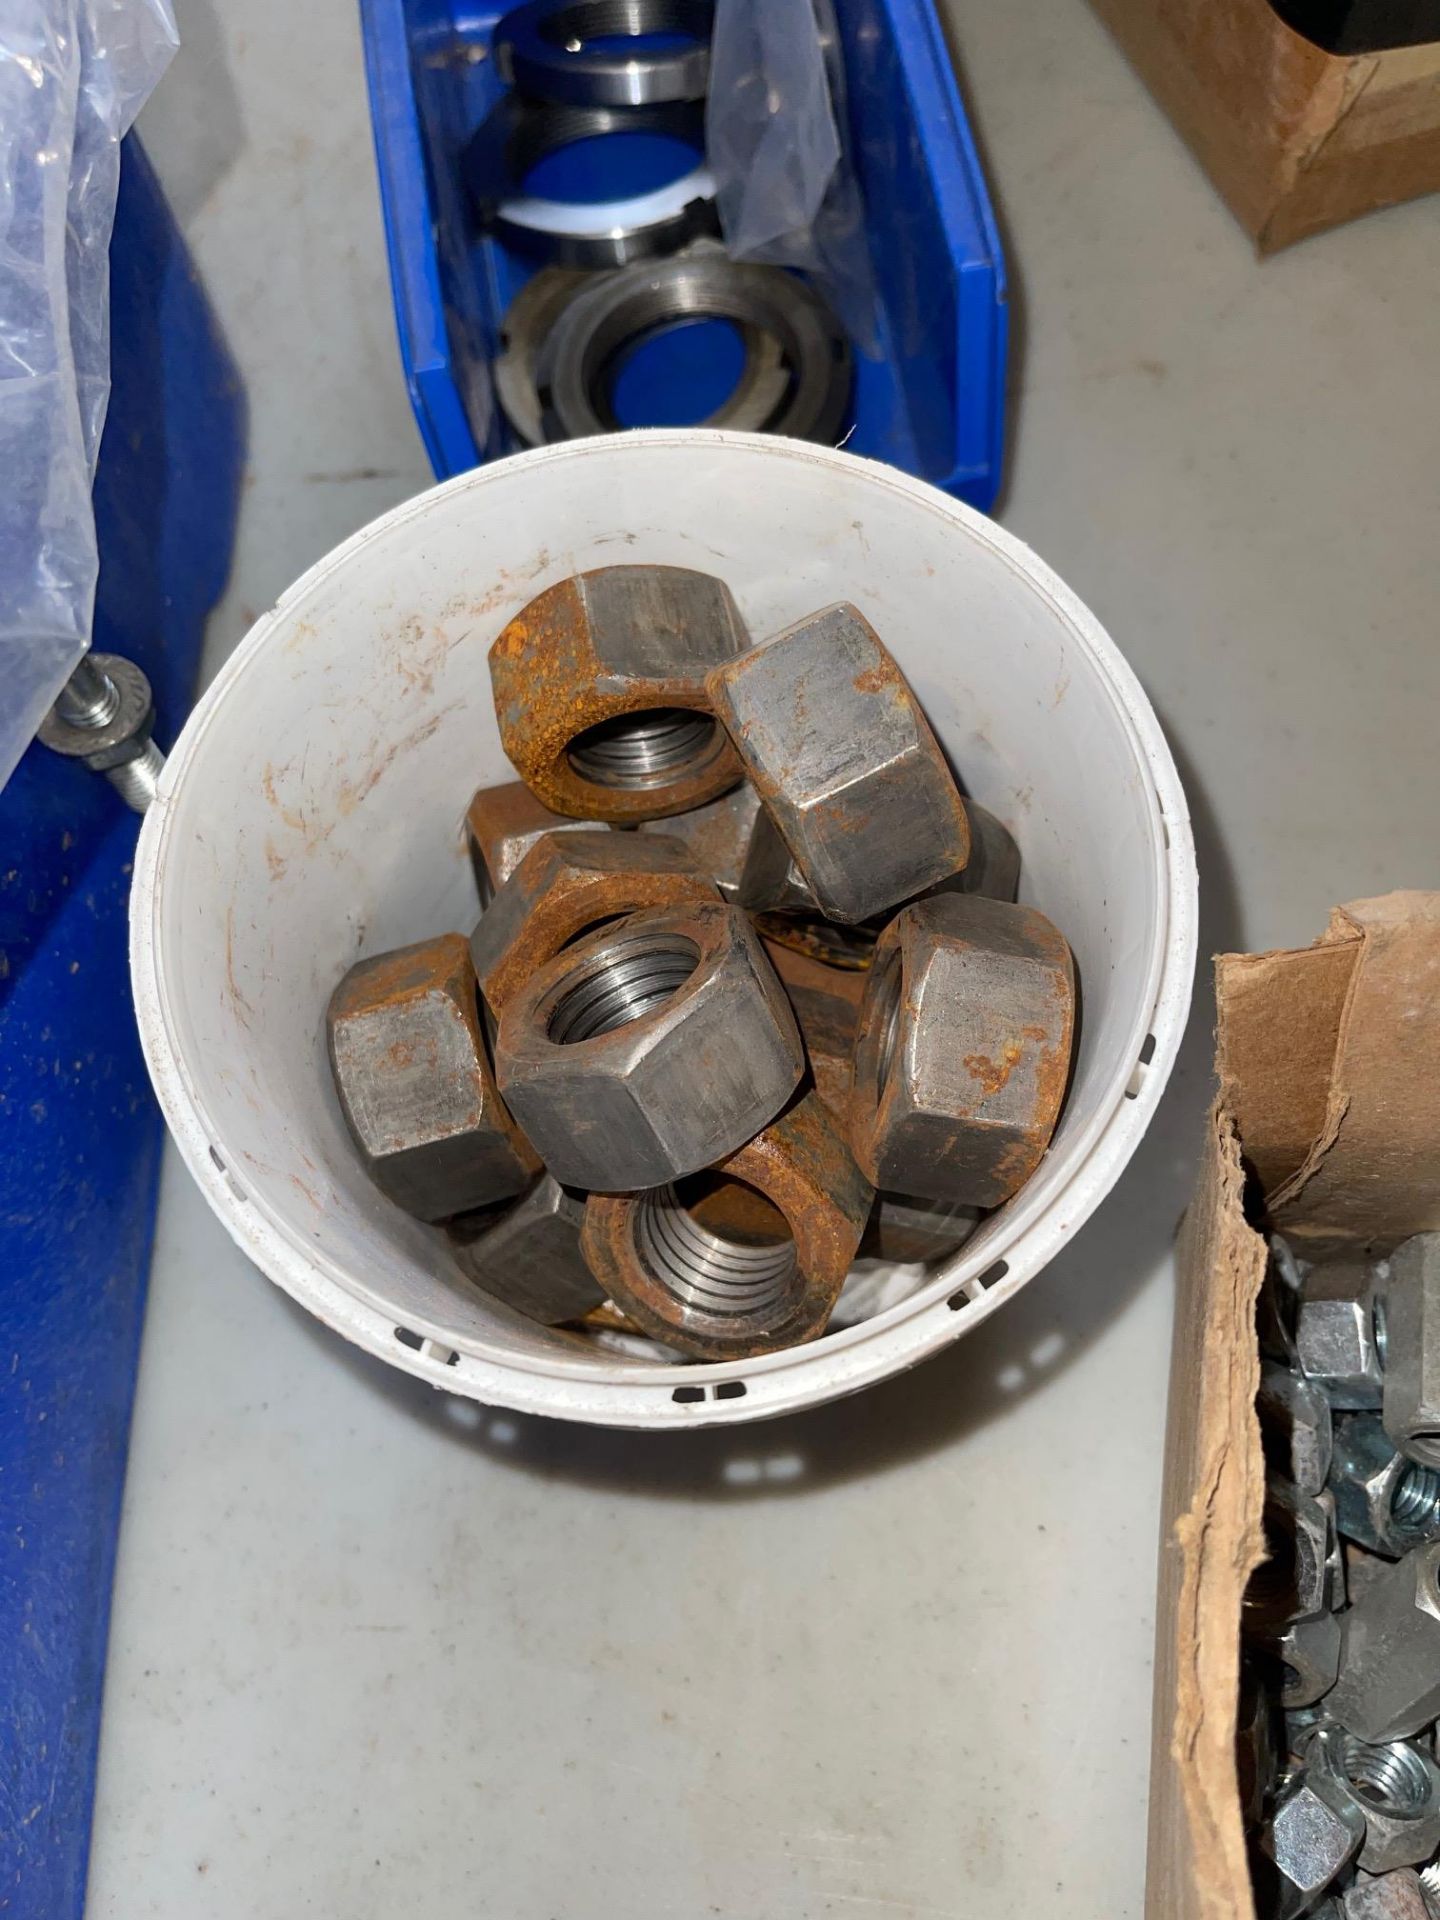 LOT OF A WIDE VARIETY OF NUTS, RANGE 1/4” - 1 “, RIGGING FEE $25.00 - Image 8 of 12